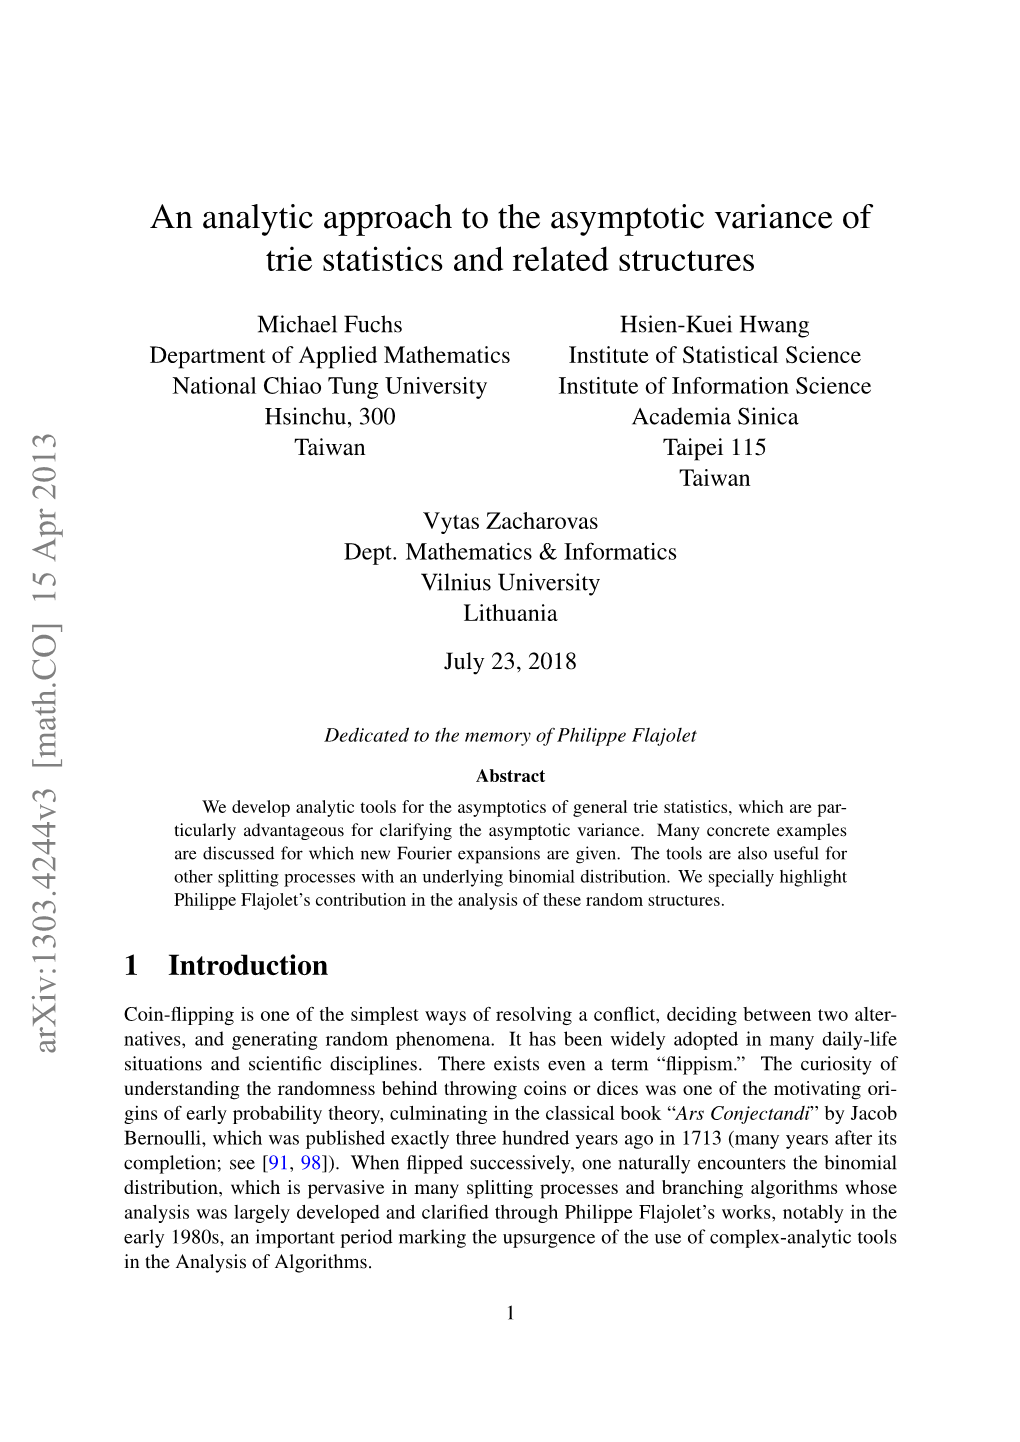 An Analytic Approach to the Asymptotic Variance of Trie Statistics and Related Structures